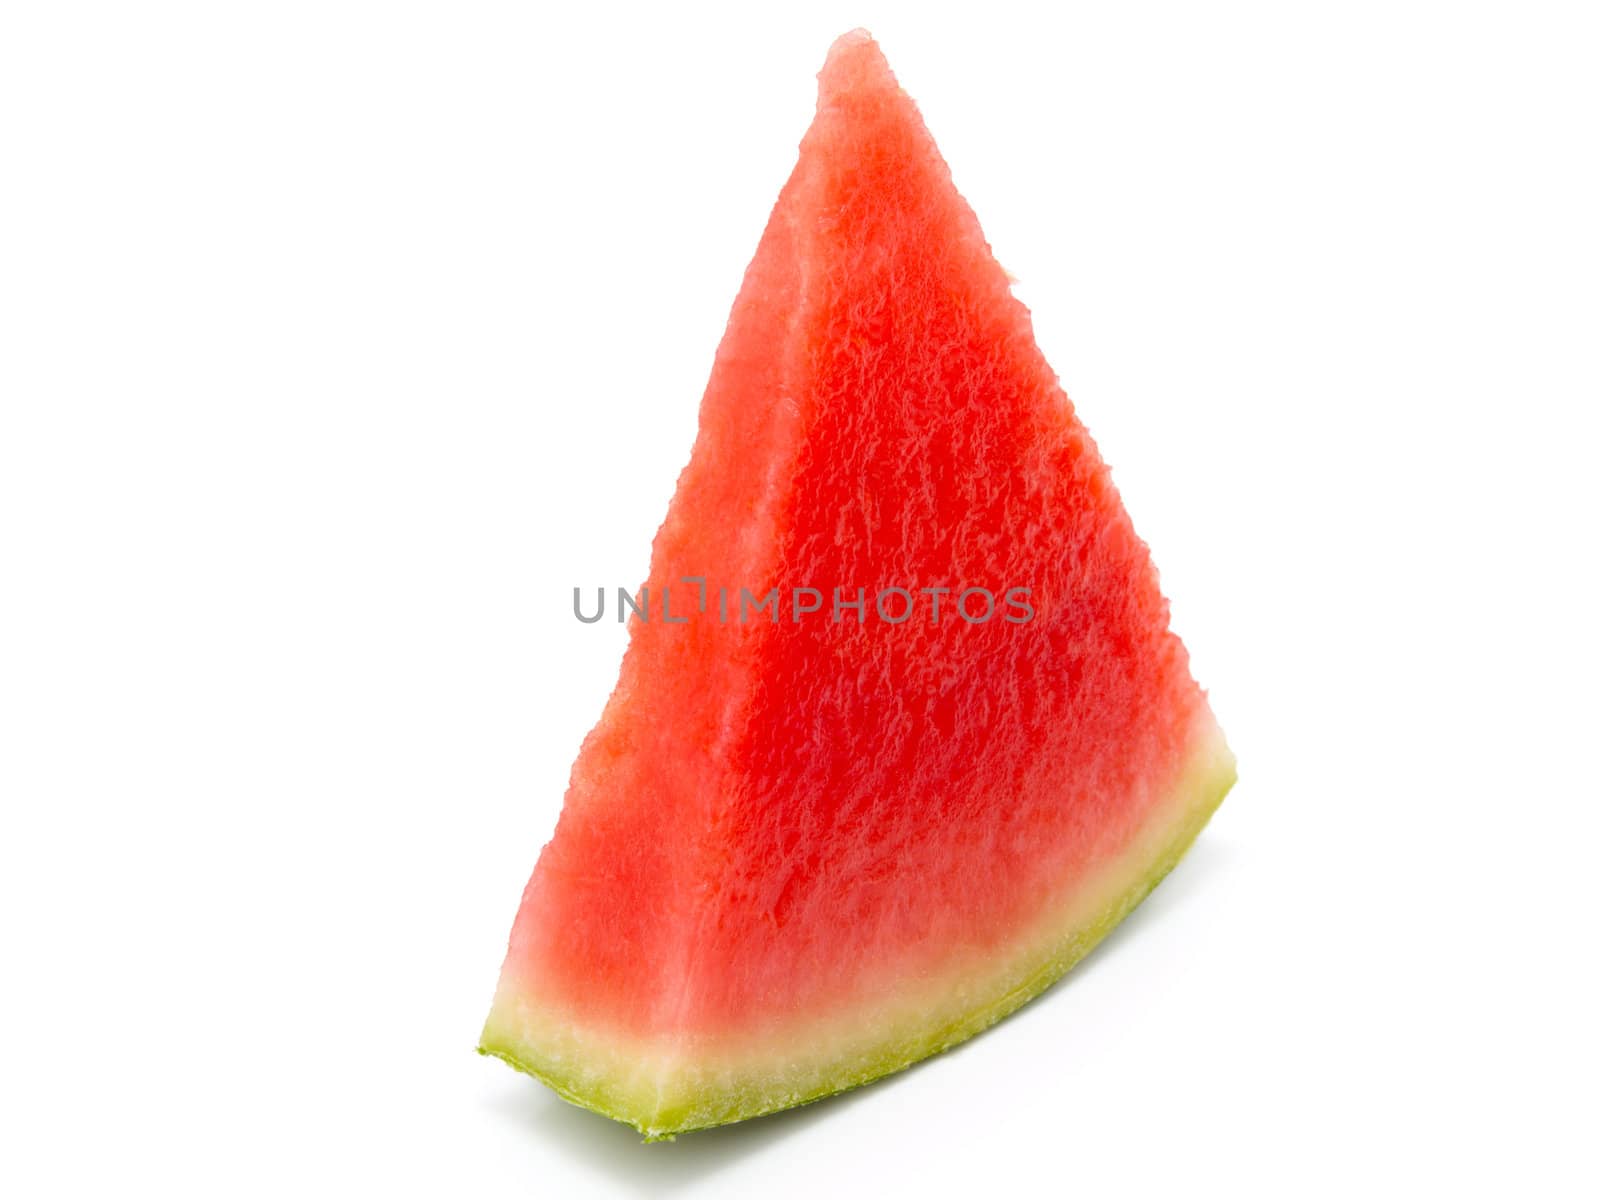 slice of water-melon on white background